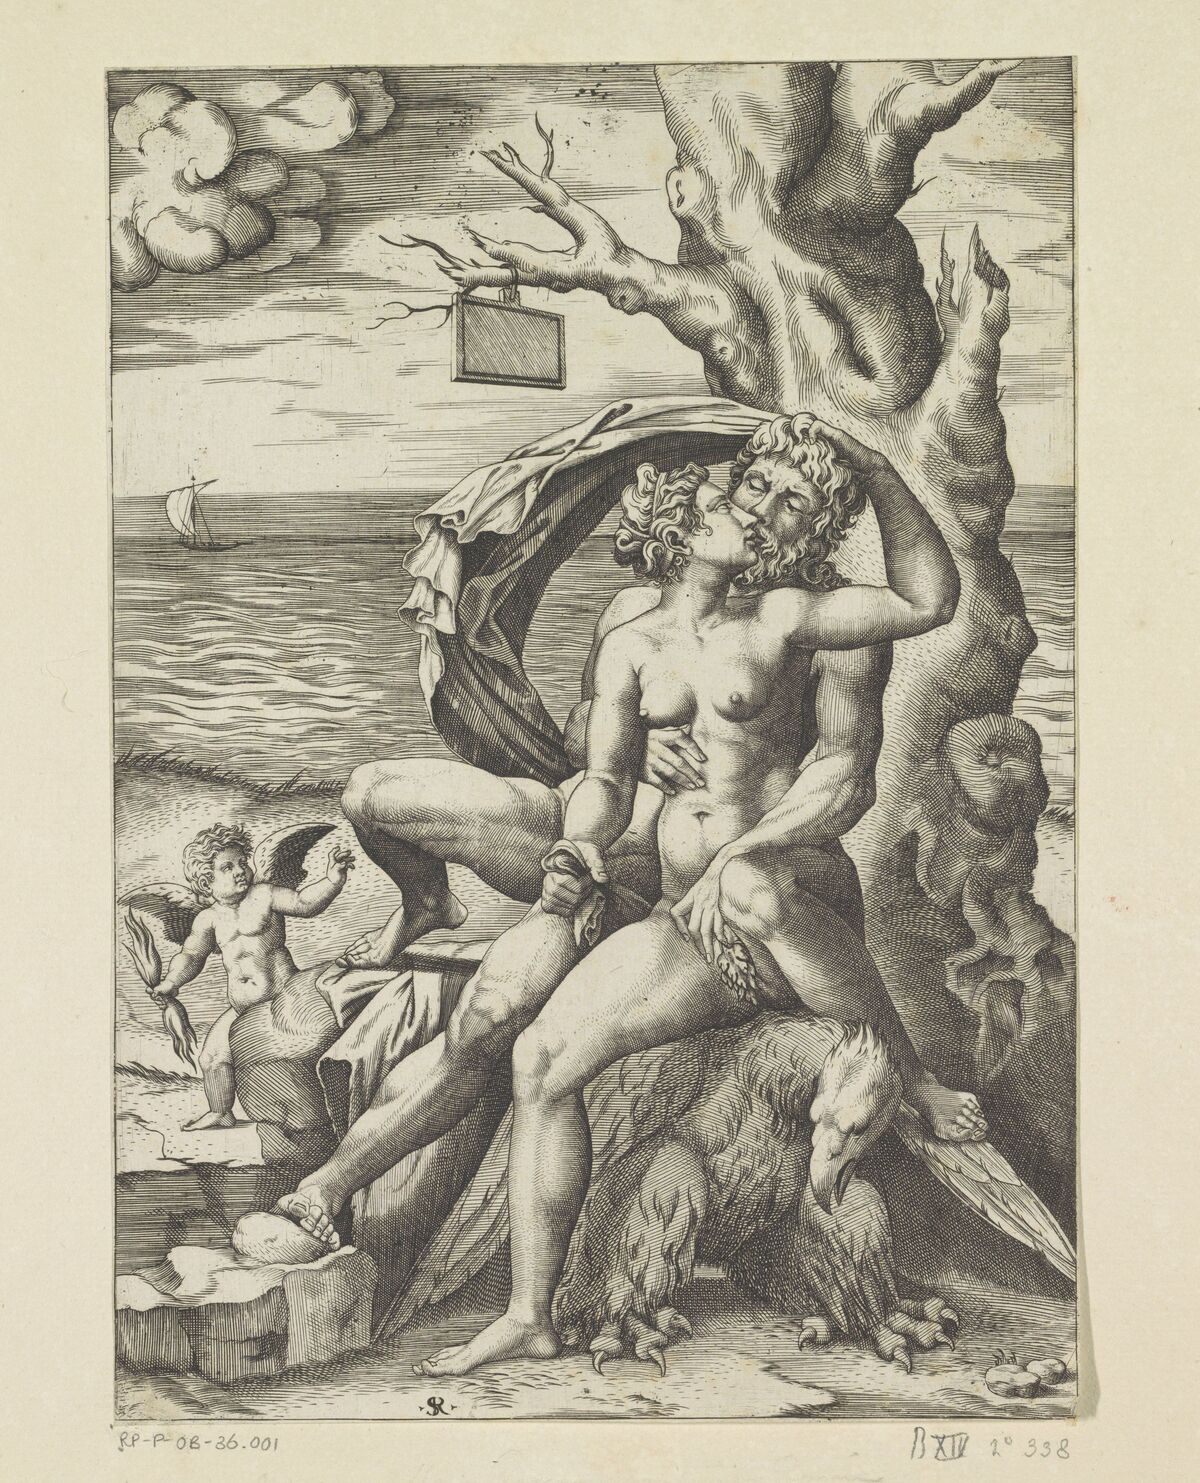 Marco Dente, after Giulio Romano, Jupiter and Semele, 1498–1532. Courtesy of the Rijksmuseum.